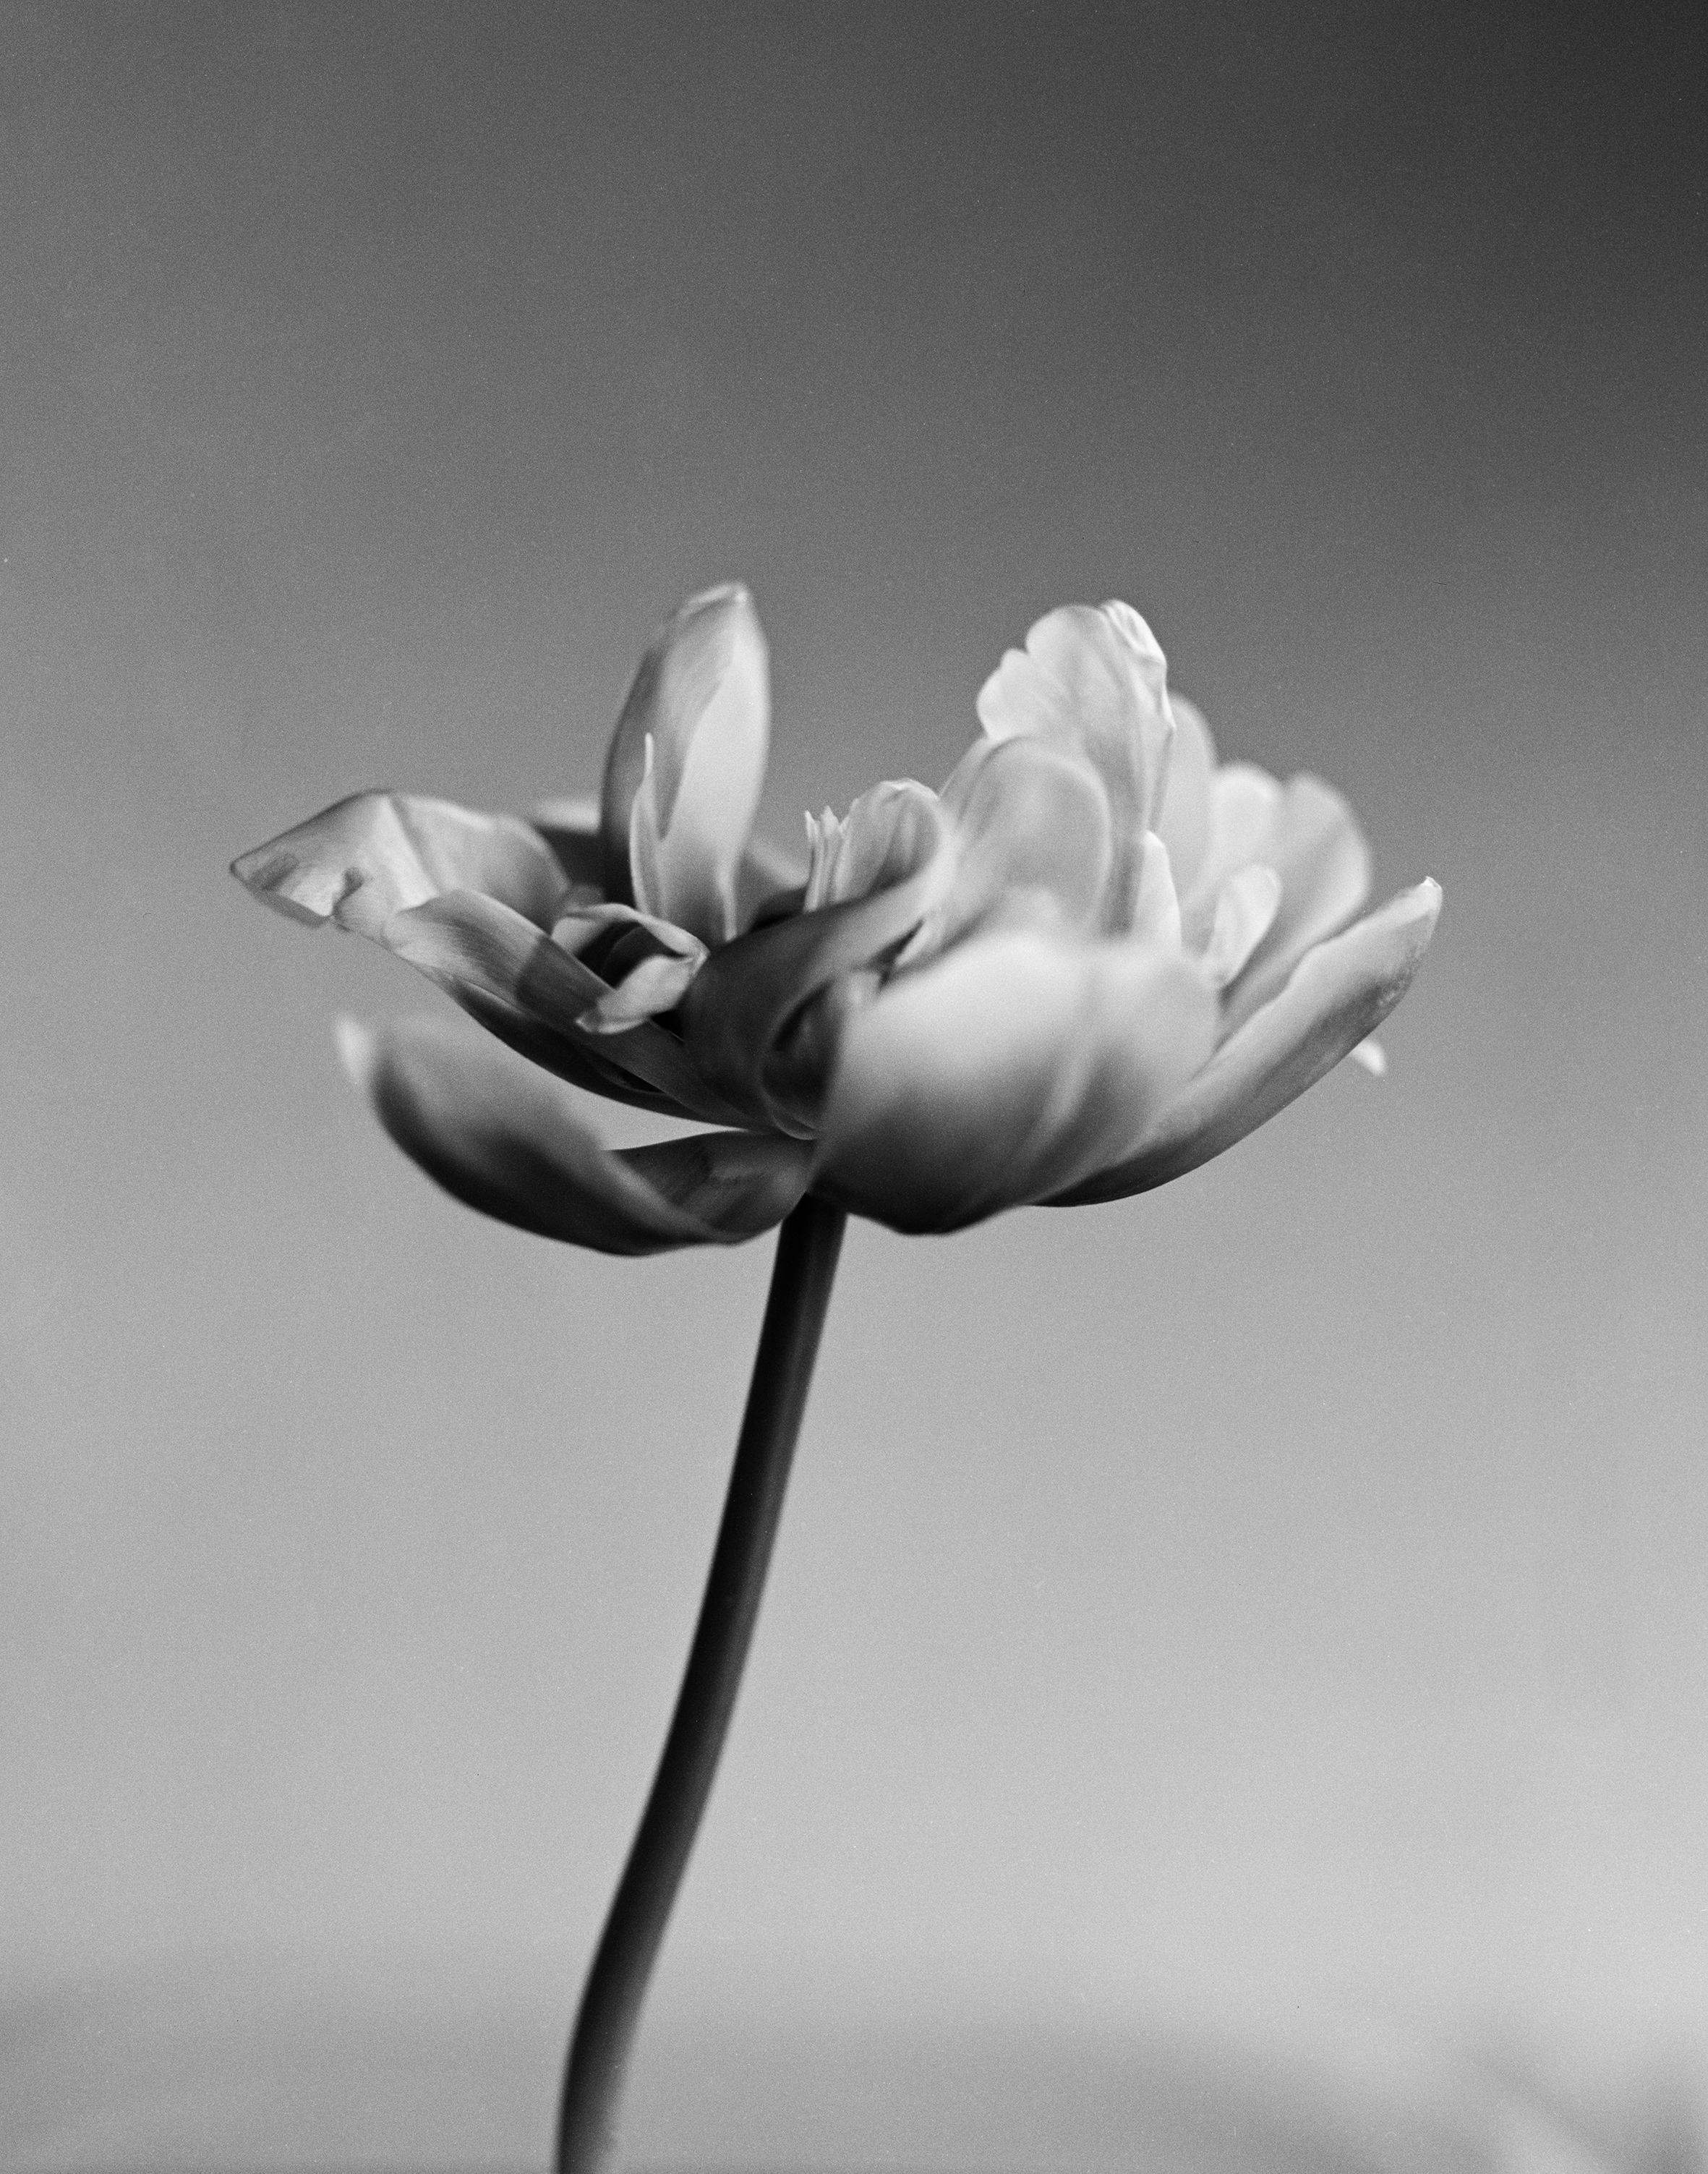 Ugne Pouwell Still-Life Photograph - Tulip - analogue black and white floral photography, Limited edition of 10